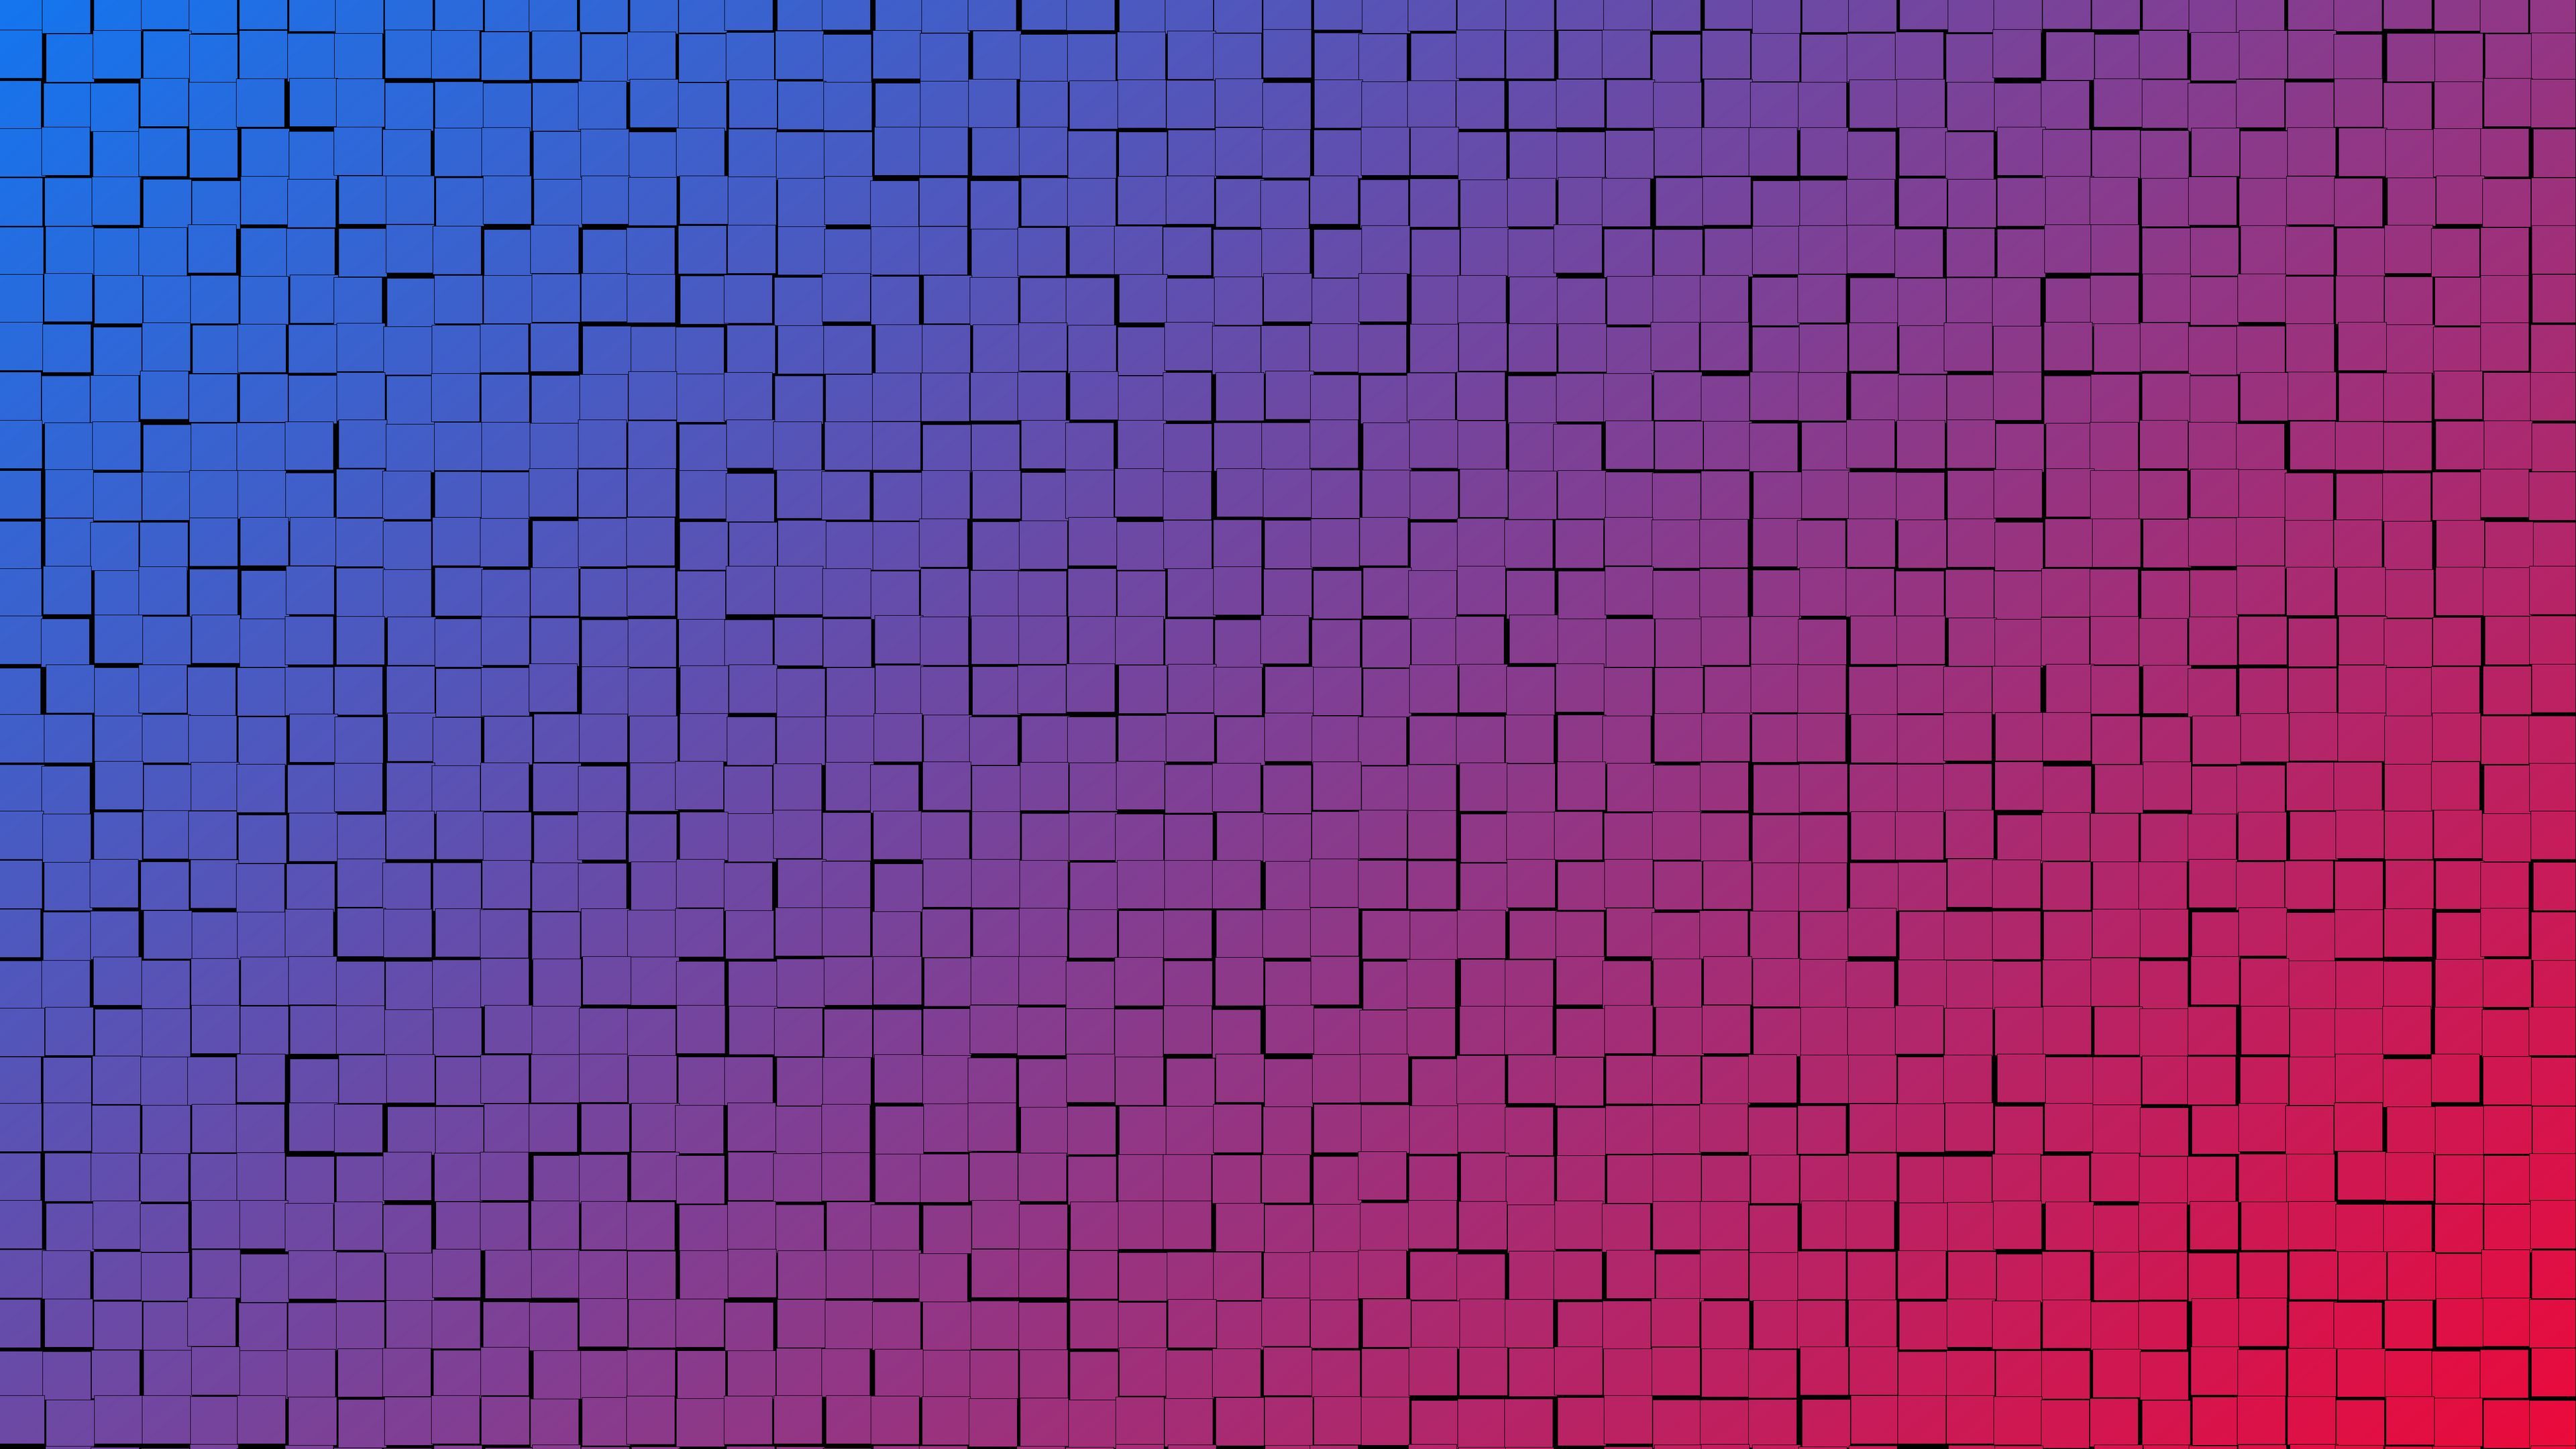 Download wallpaper 3840x2160 pattern, cubes, gradient, lines, abstraction, shade 4k uhd 16:9 HD background